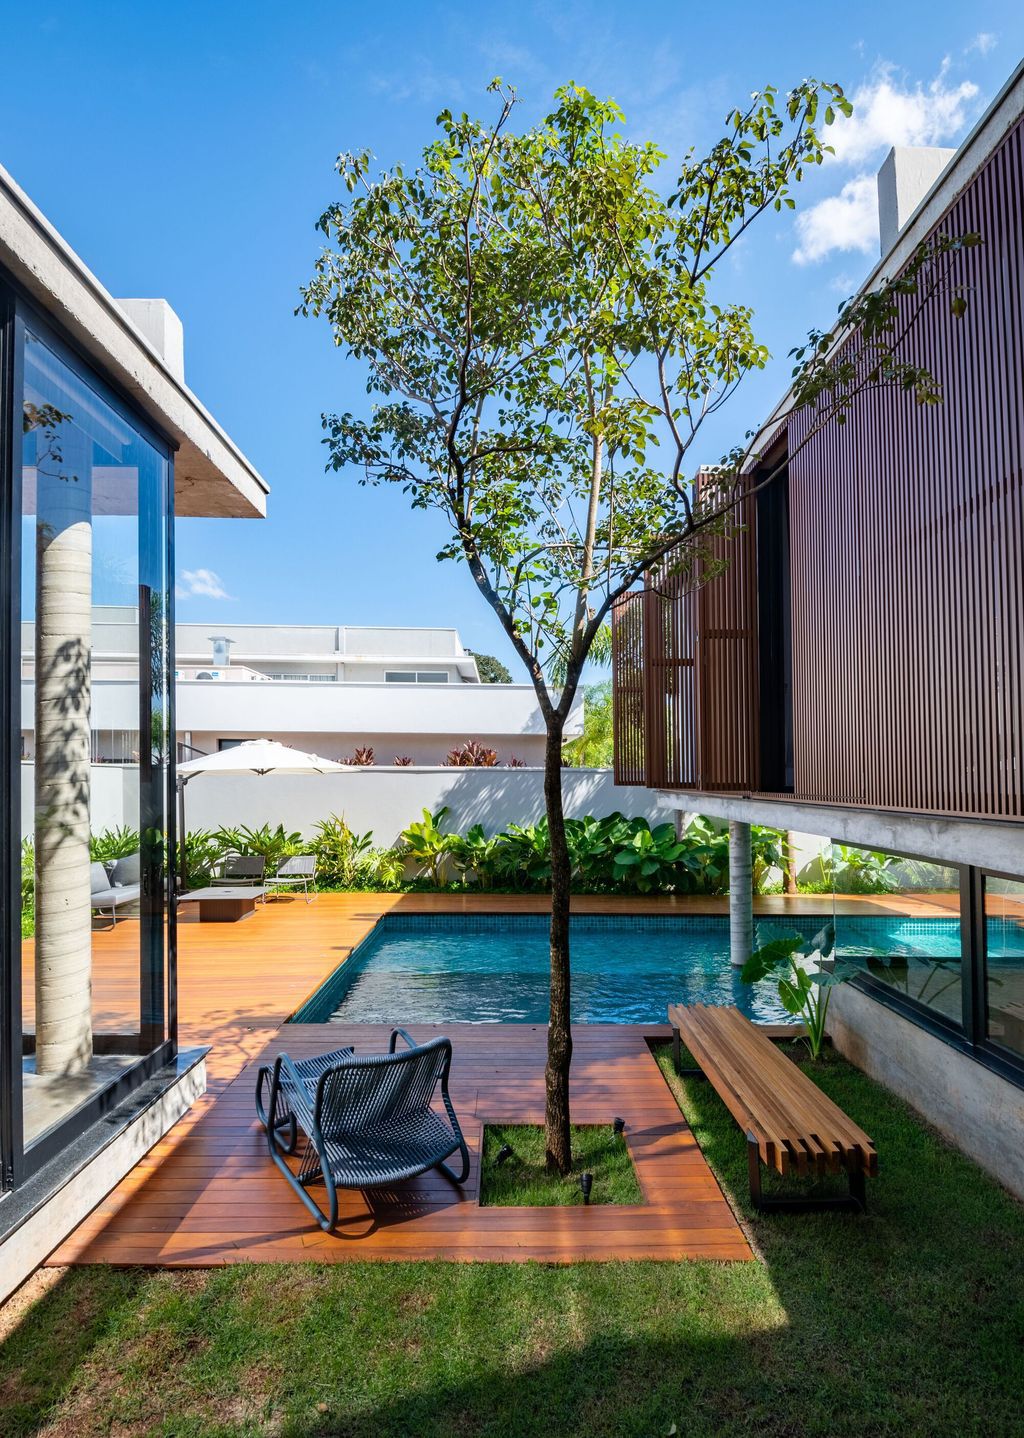 Patio House with Architectural Innovation by Caio Persighini Arquitetura